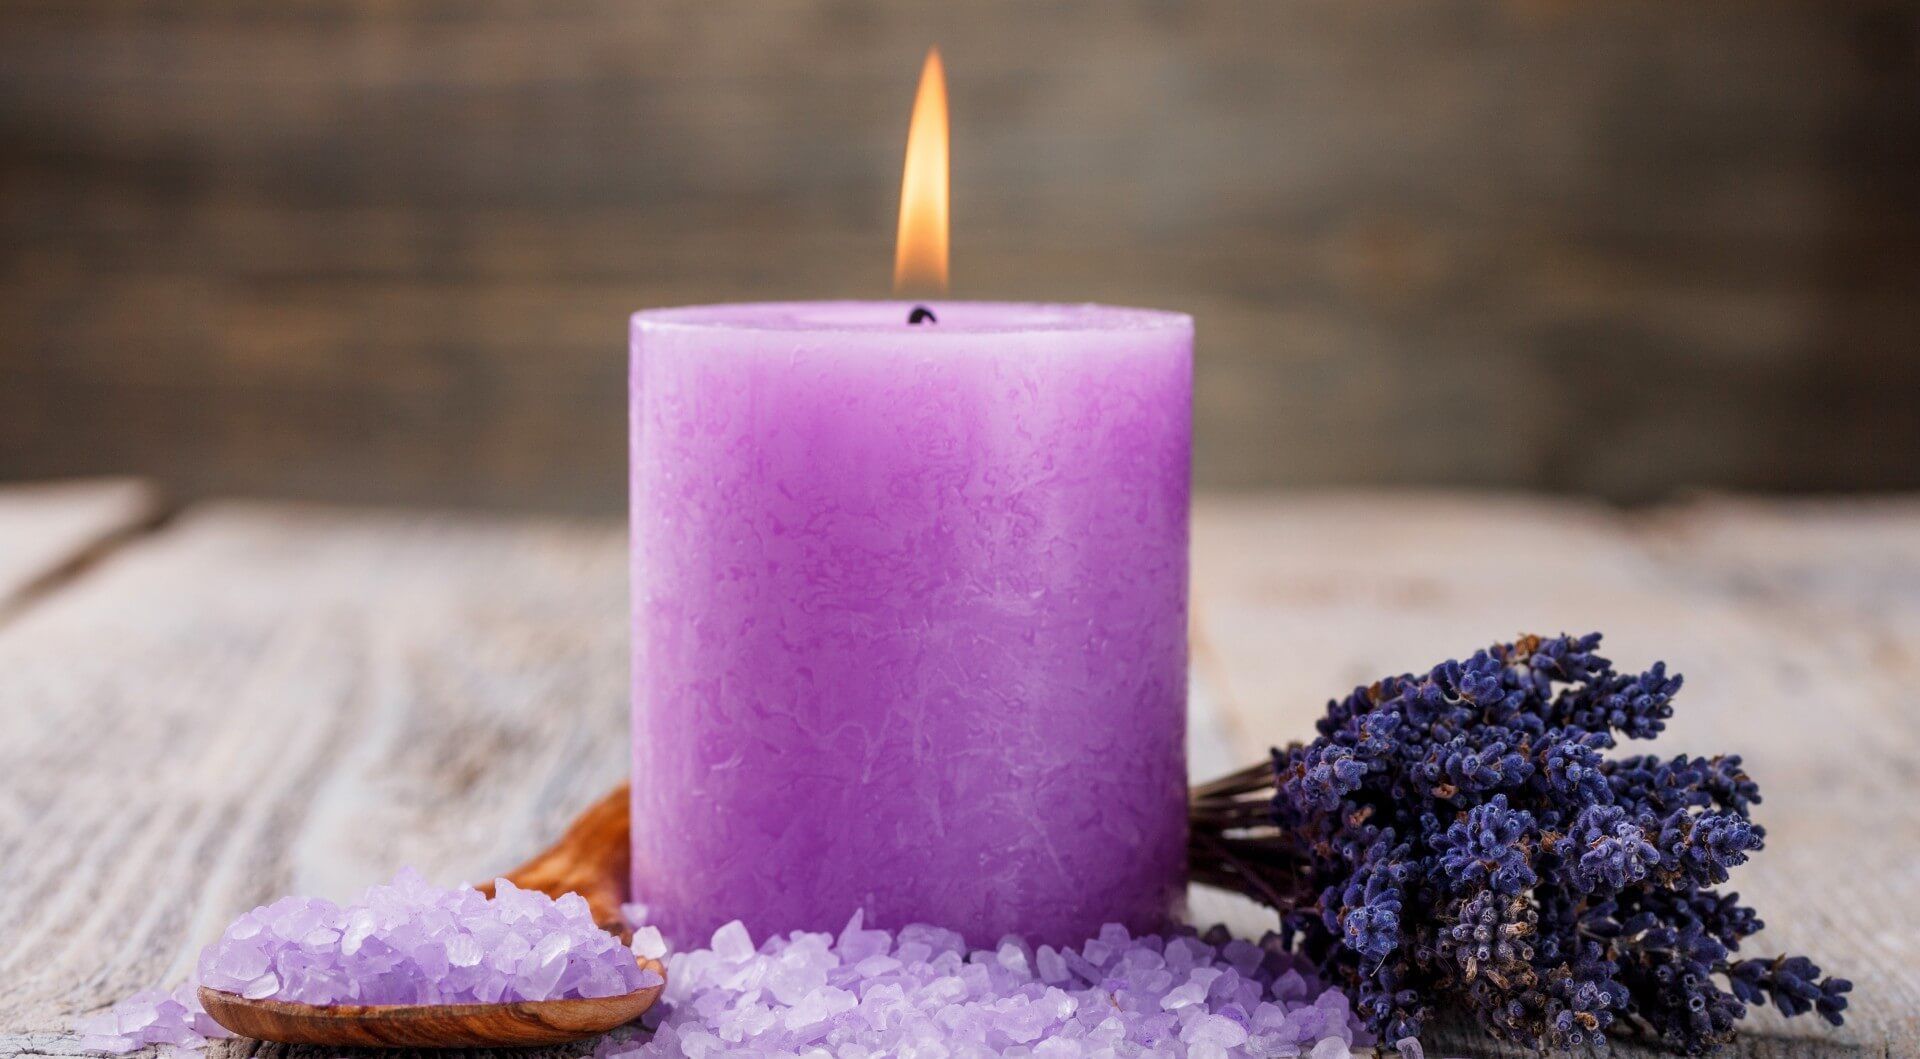 Purple lavender-scented candle that has the scent to drive bugs and pests away